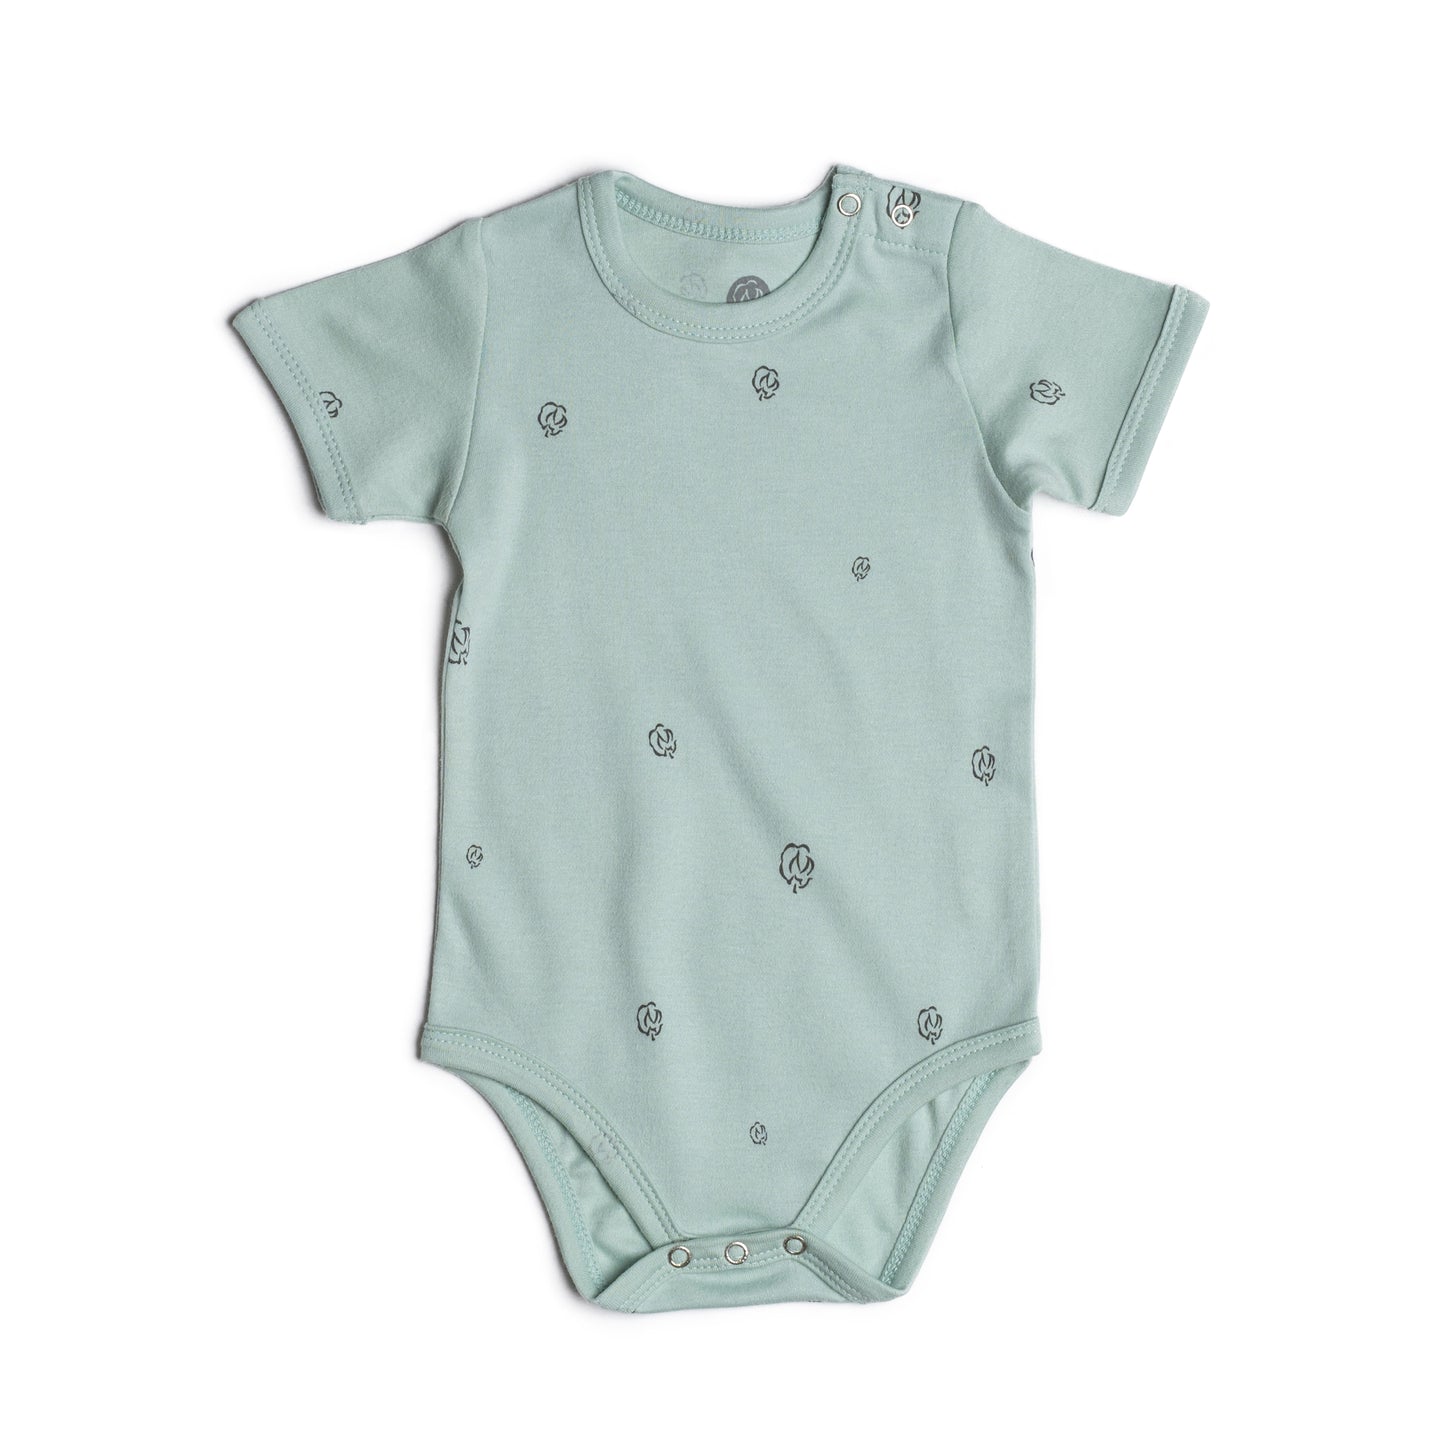 Newborn shortsleeved baby body suit - Sage with Cotton Bloom